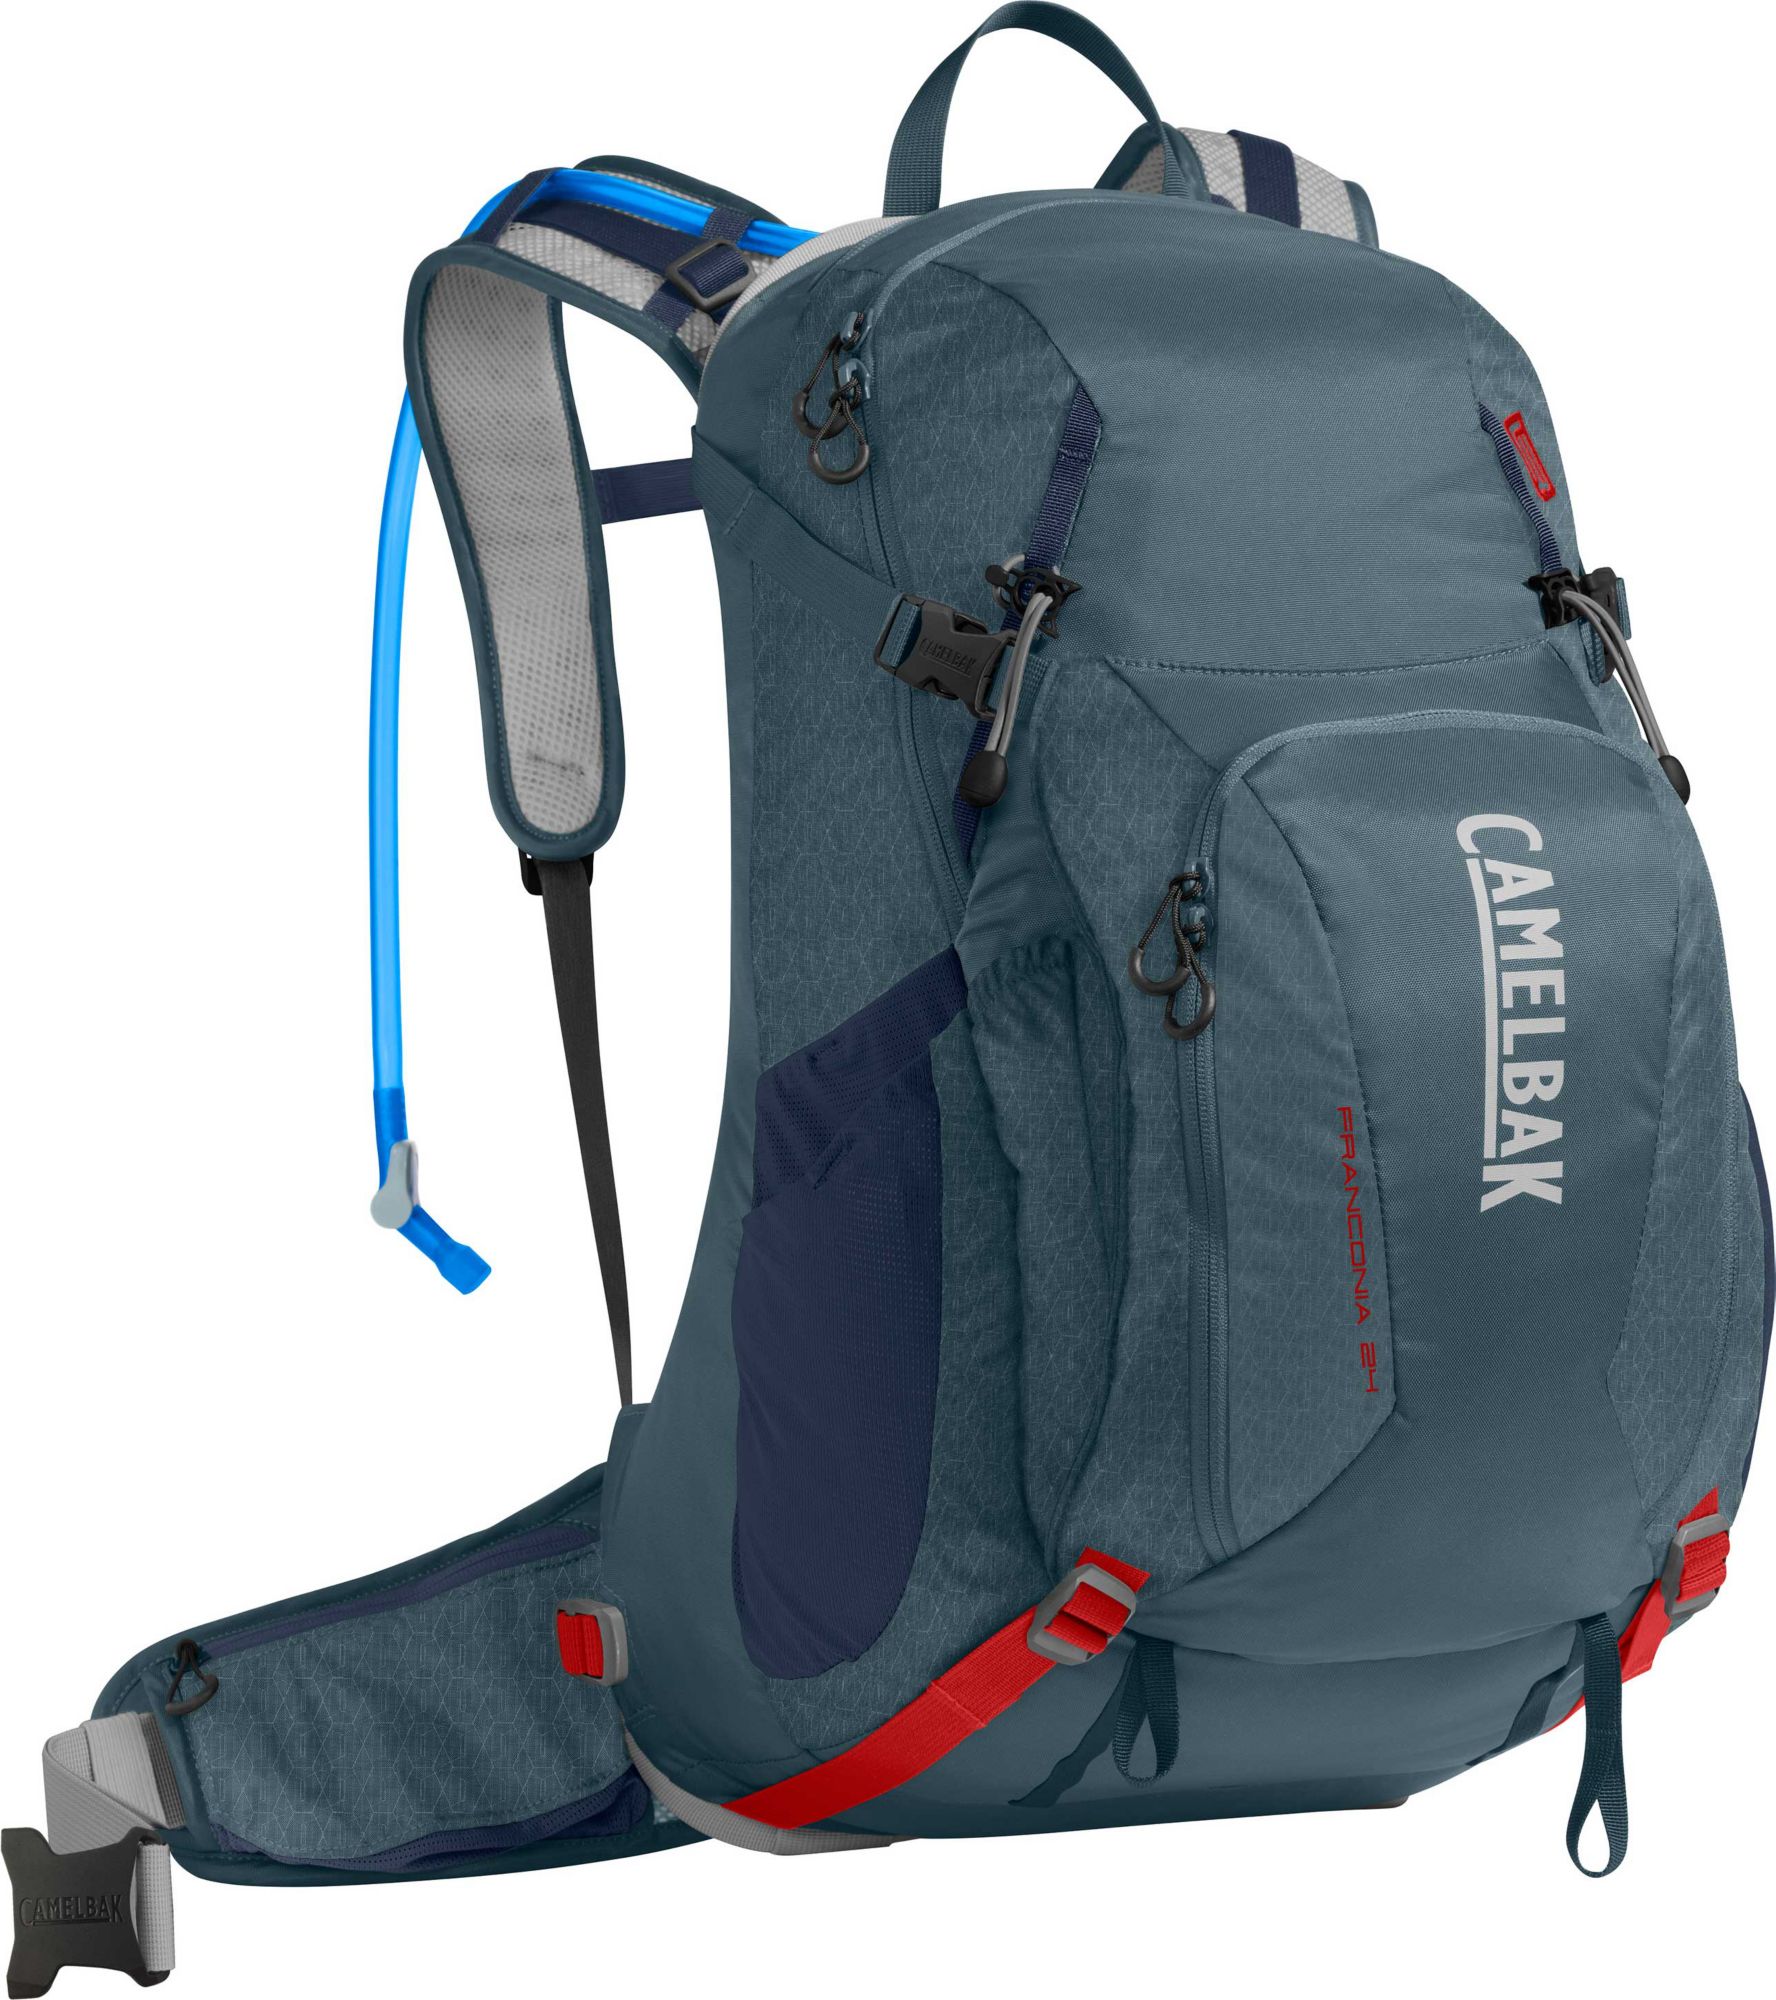 Hiking Hydration Packs & Accessories | DICK'S Sporting Goods